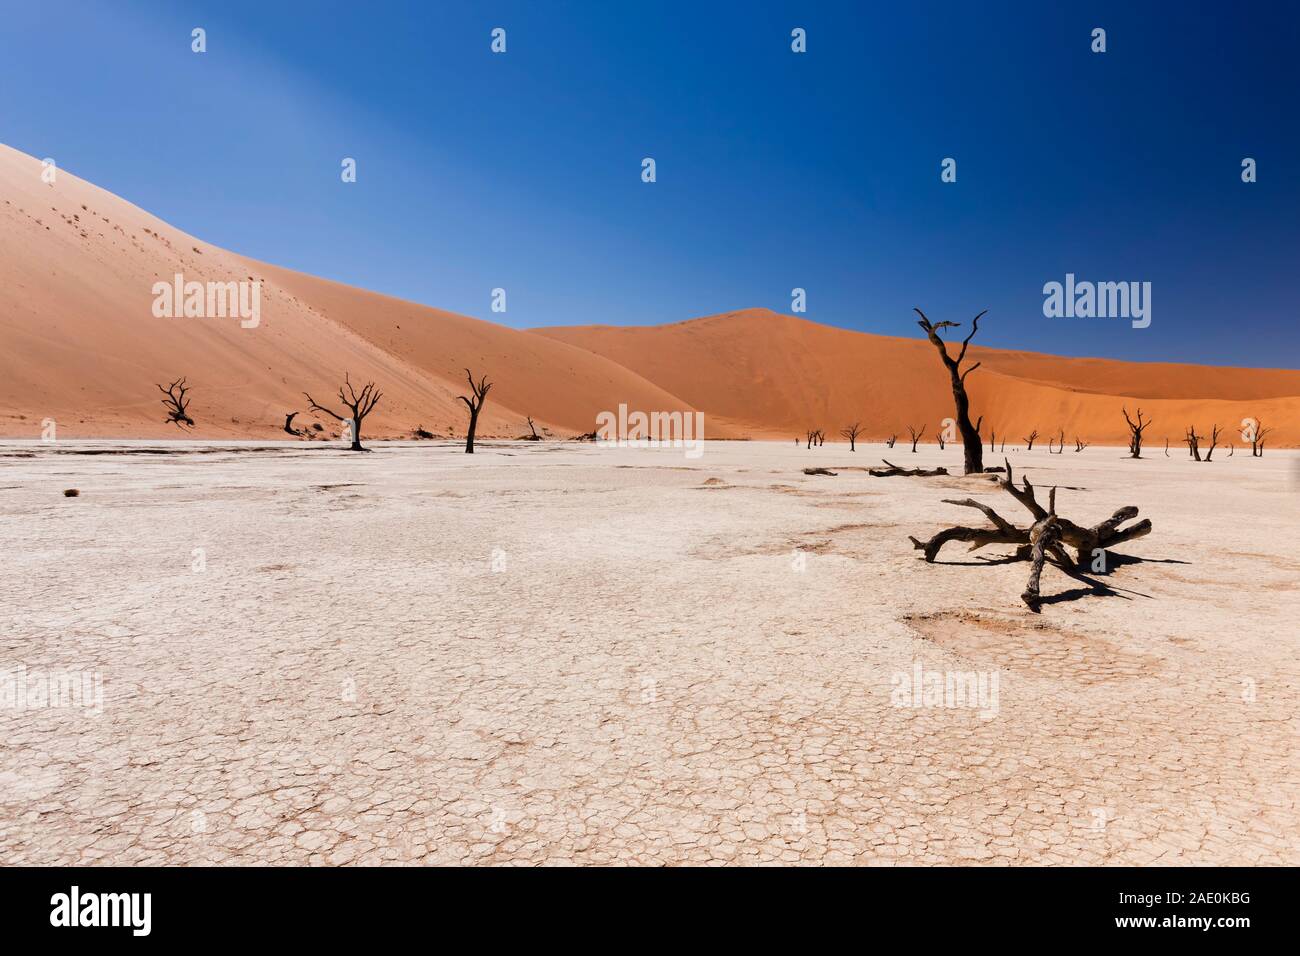 Dried up white lake and dead trees, Deadvlei, Namib Desert, Namib-Naukluft National Park, Namibia, Southern Africa, Africa Stock Photo